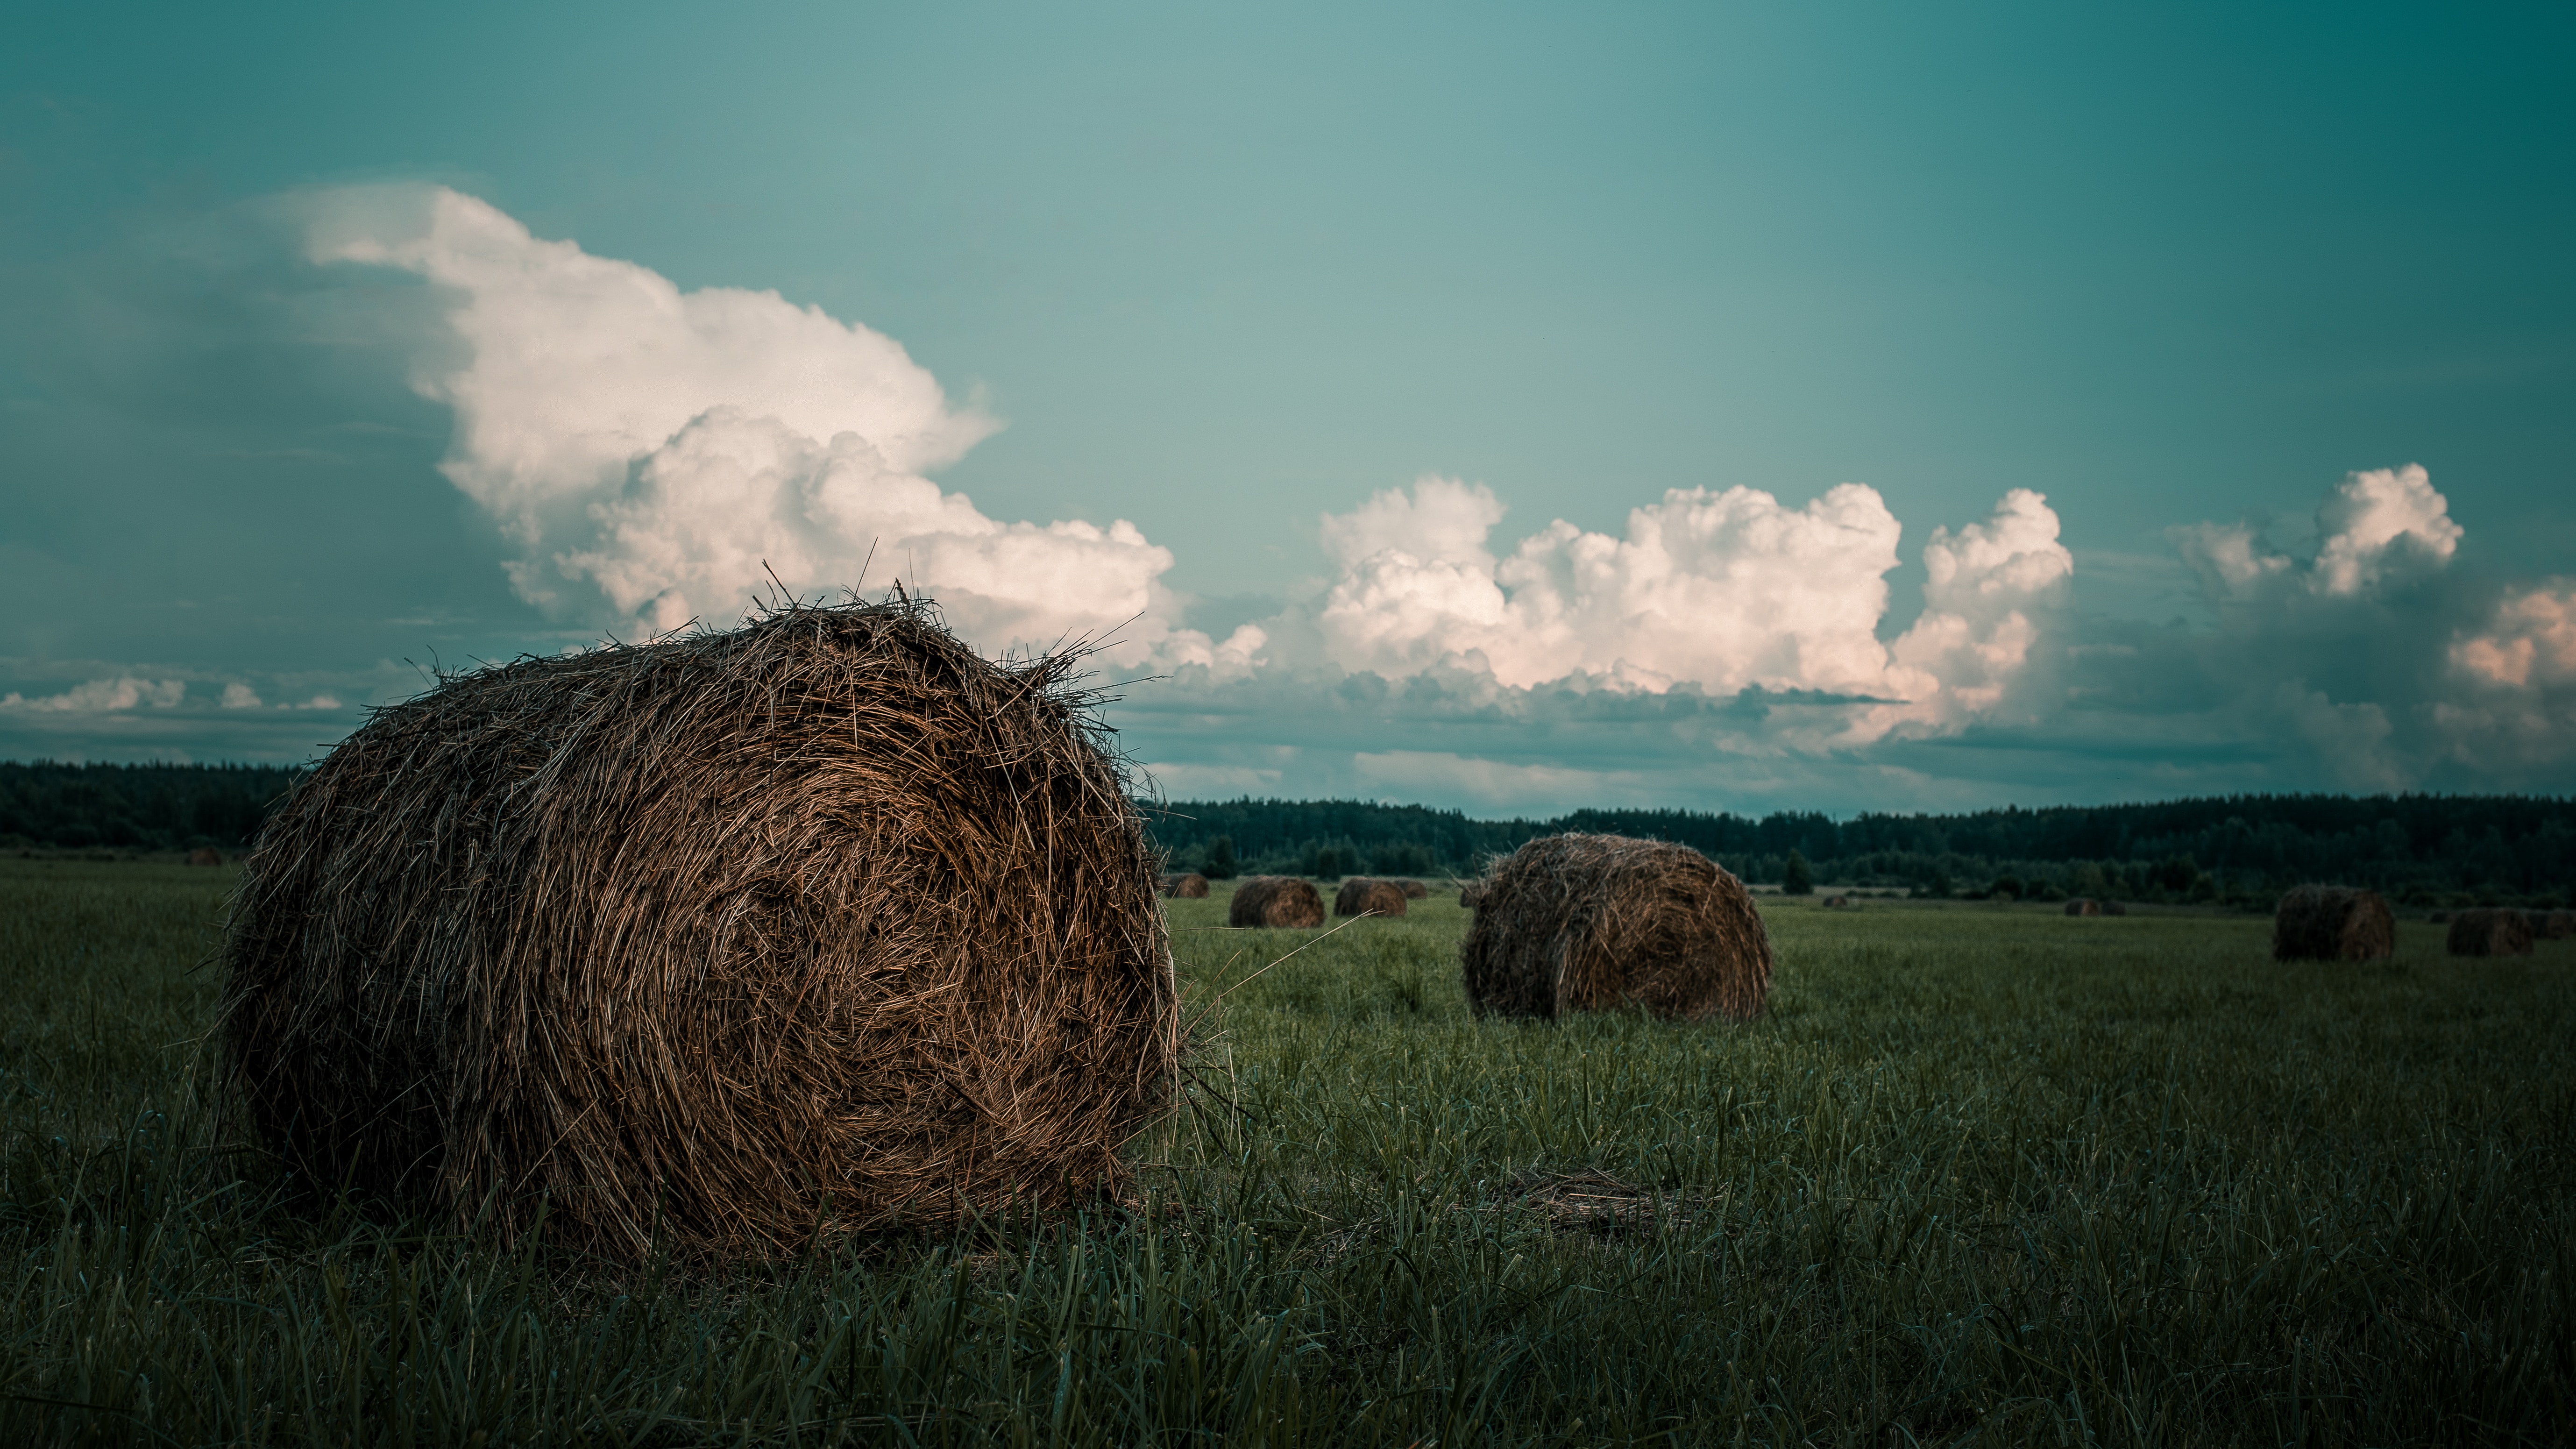 Cow hay for sale